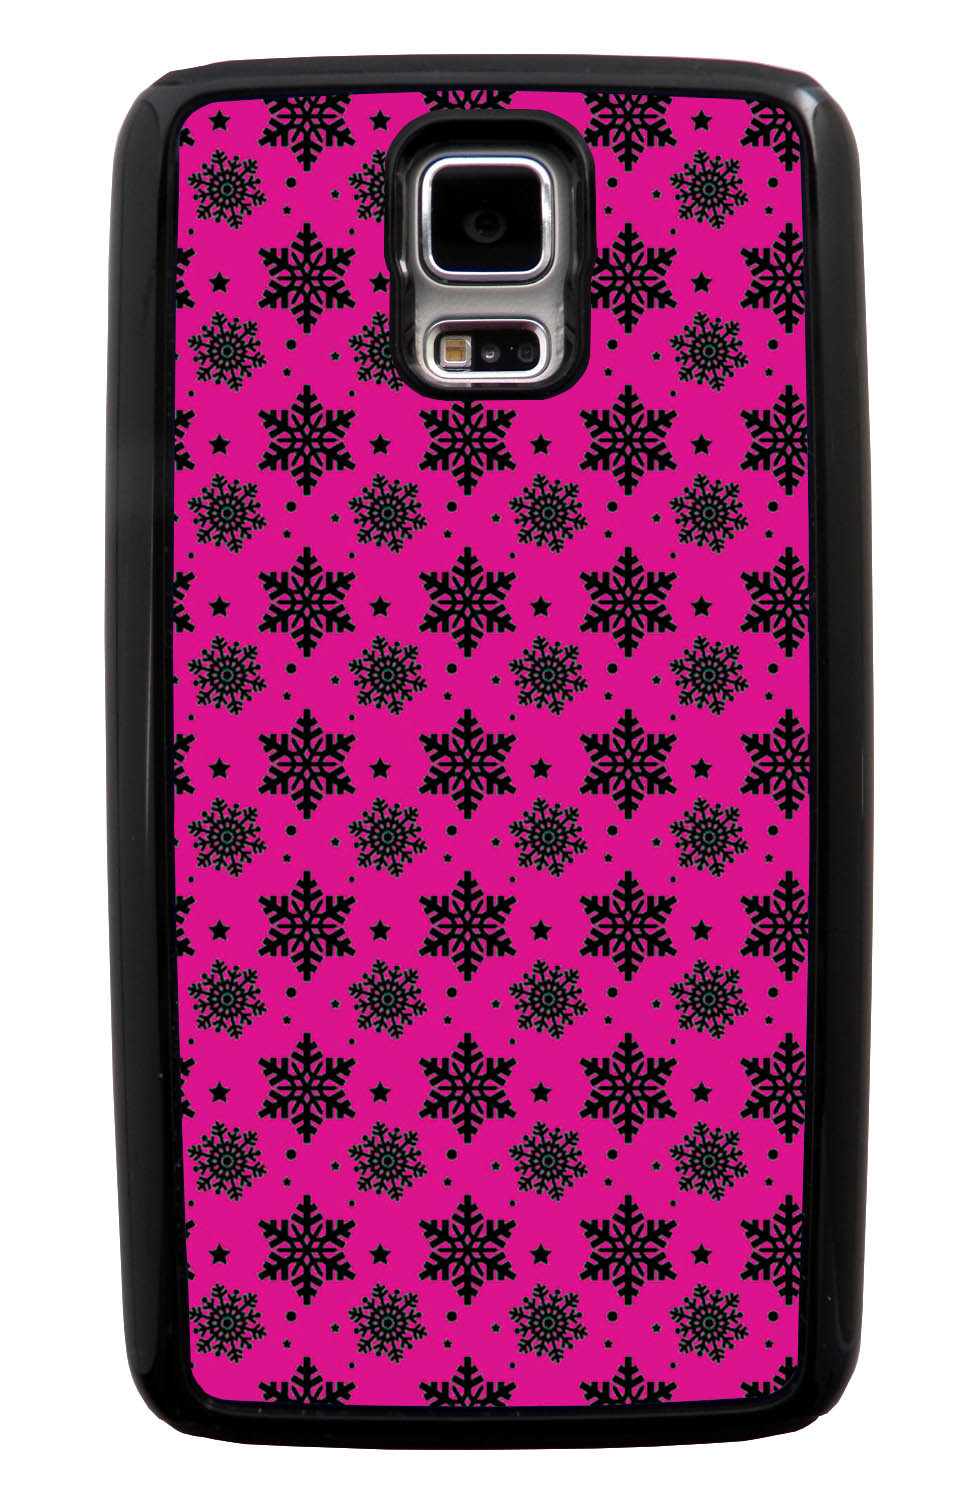 Samsung Galaxy S5 / SV Pink Case - Black Snowflakes on Hot Pink - Fall And Winter - Black Tough Hybrid Case